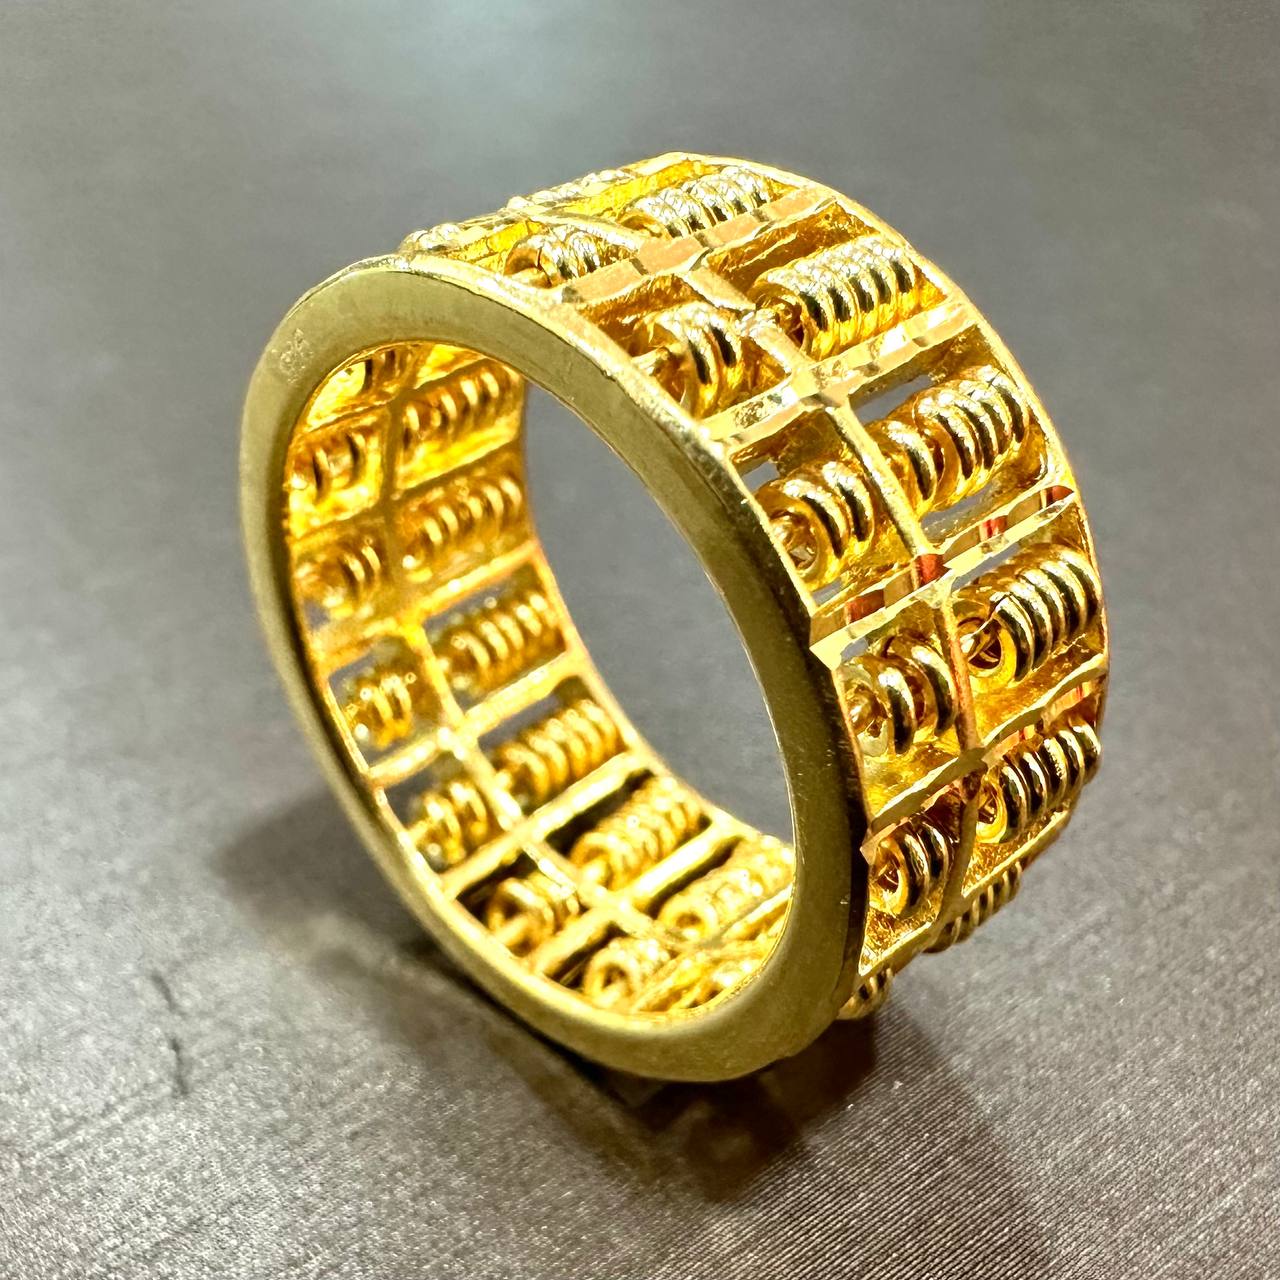 LITZ SuteraMall 丽晶五福城- 916 (22K) Gold Ring 算盘is now added to our collection  at LiTZ Sutera Mall! Message us to find out more! | Facebook